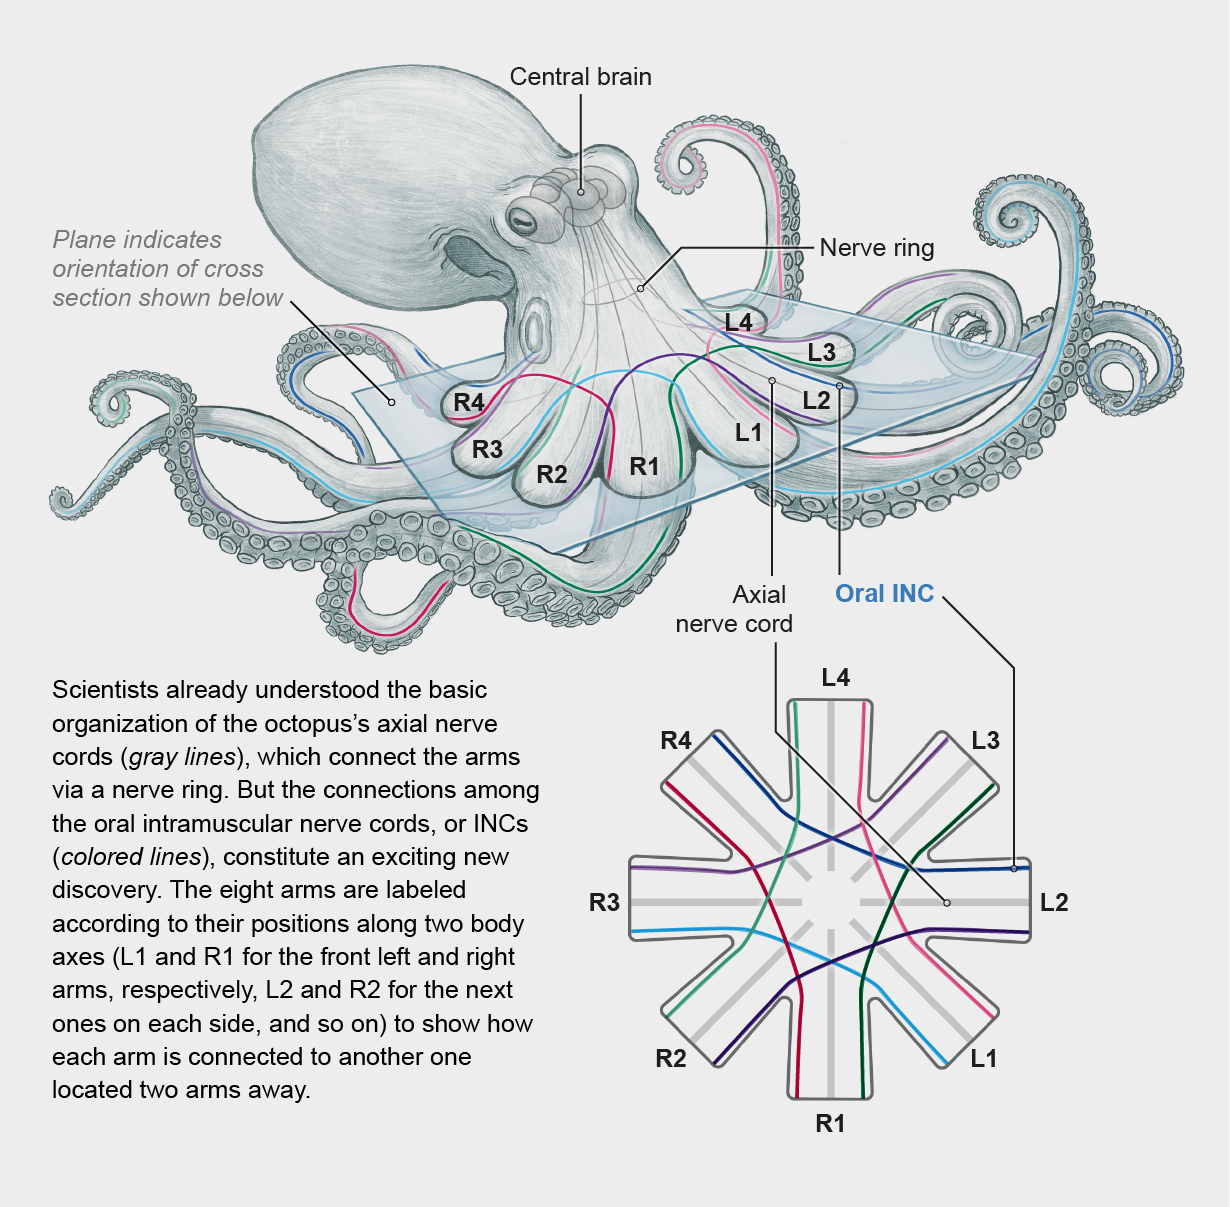 Graphic shows octopus anatomy with nervous system highlighted, along with a cross section showing how the oral intramuscular nerve cords connect each arm to another one two arms away.